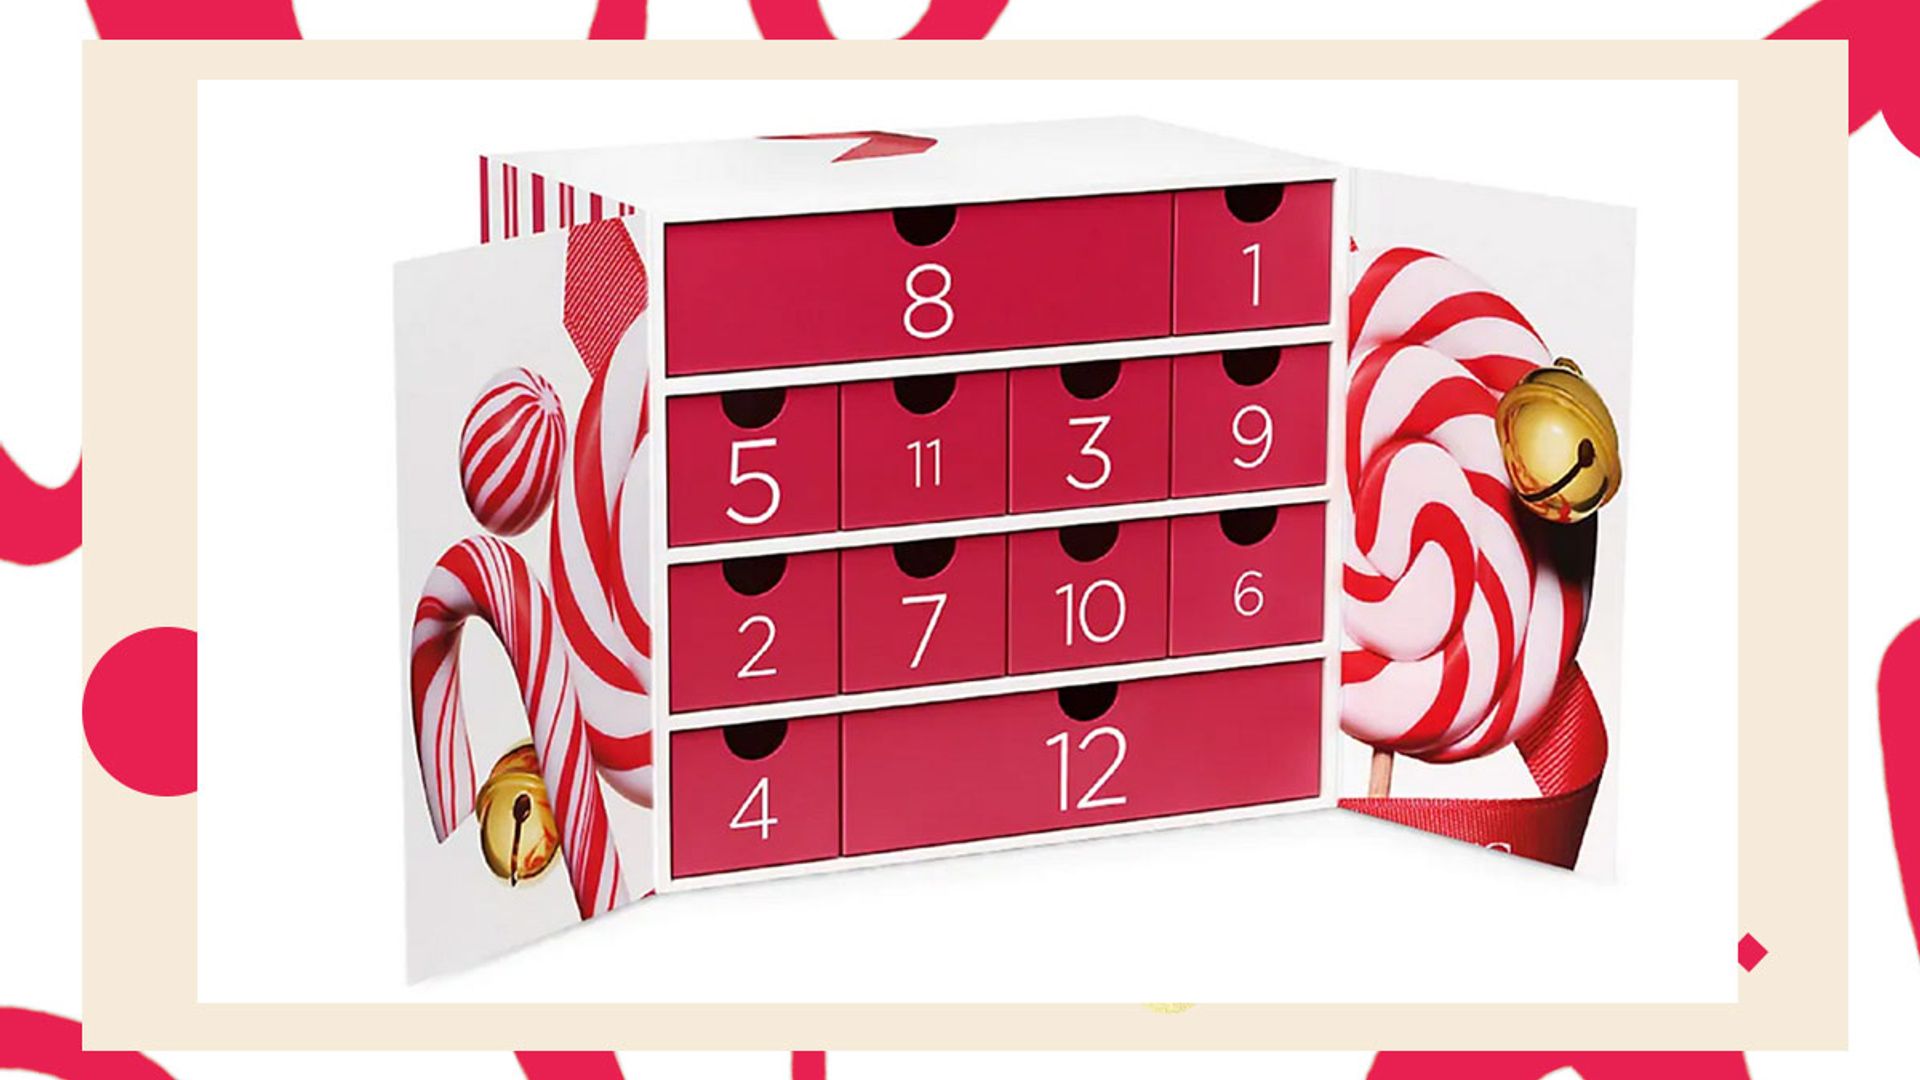 Saks is selling beauty advent calendars with a major Black Friday